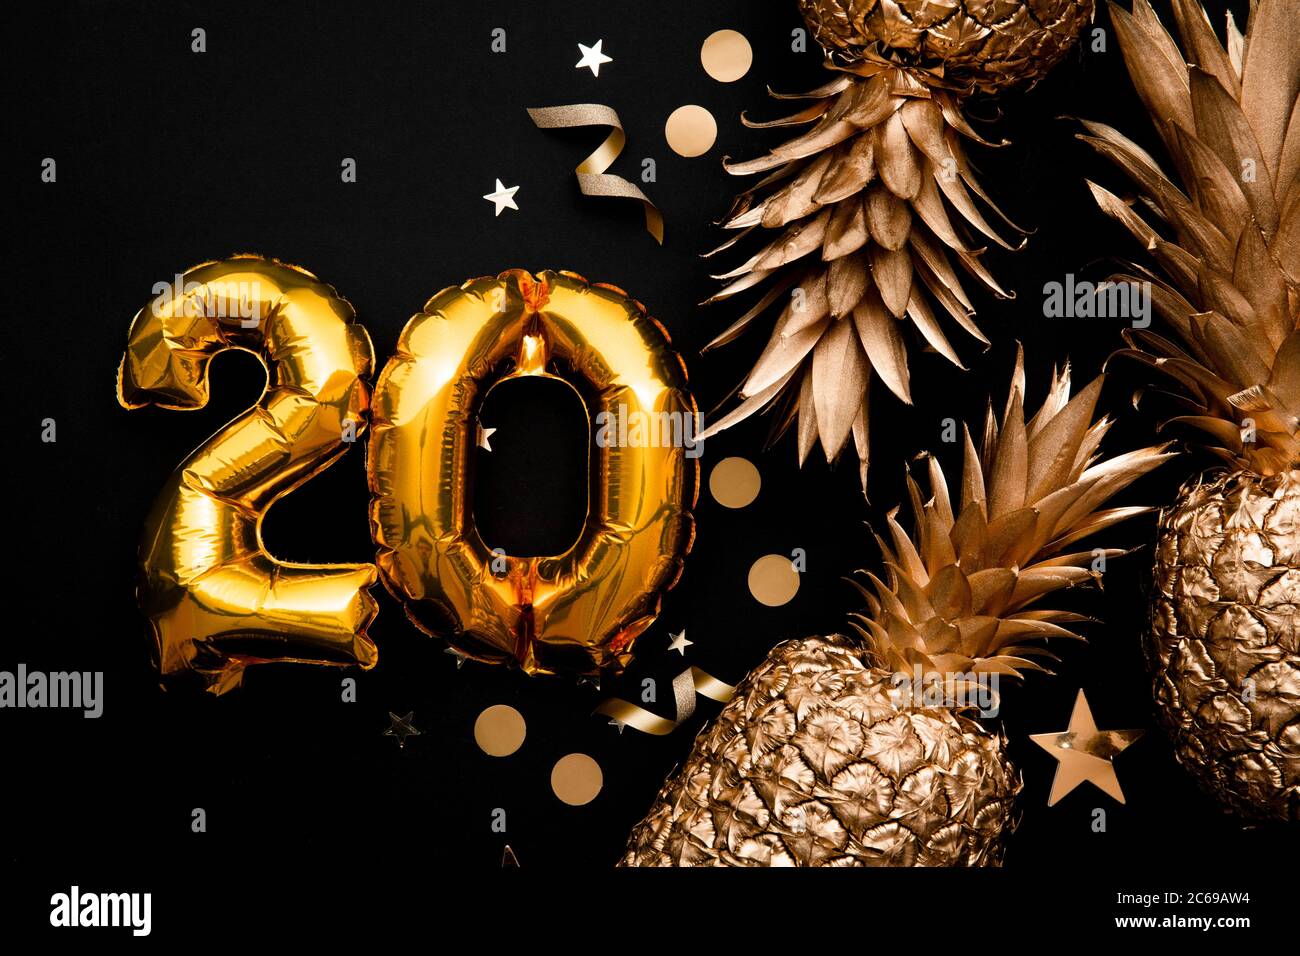 20th birthday celebration background with gold balloons and golden pineapples Stock Photo